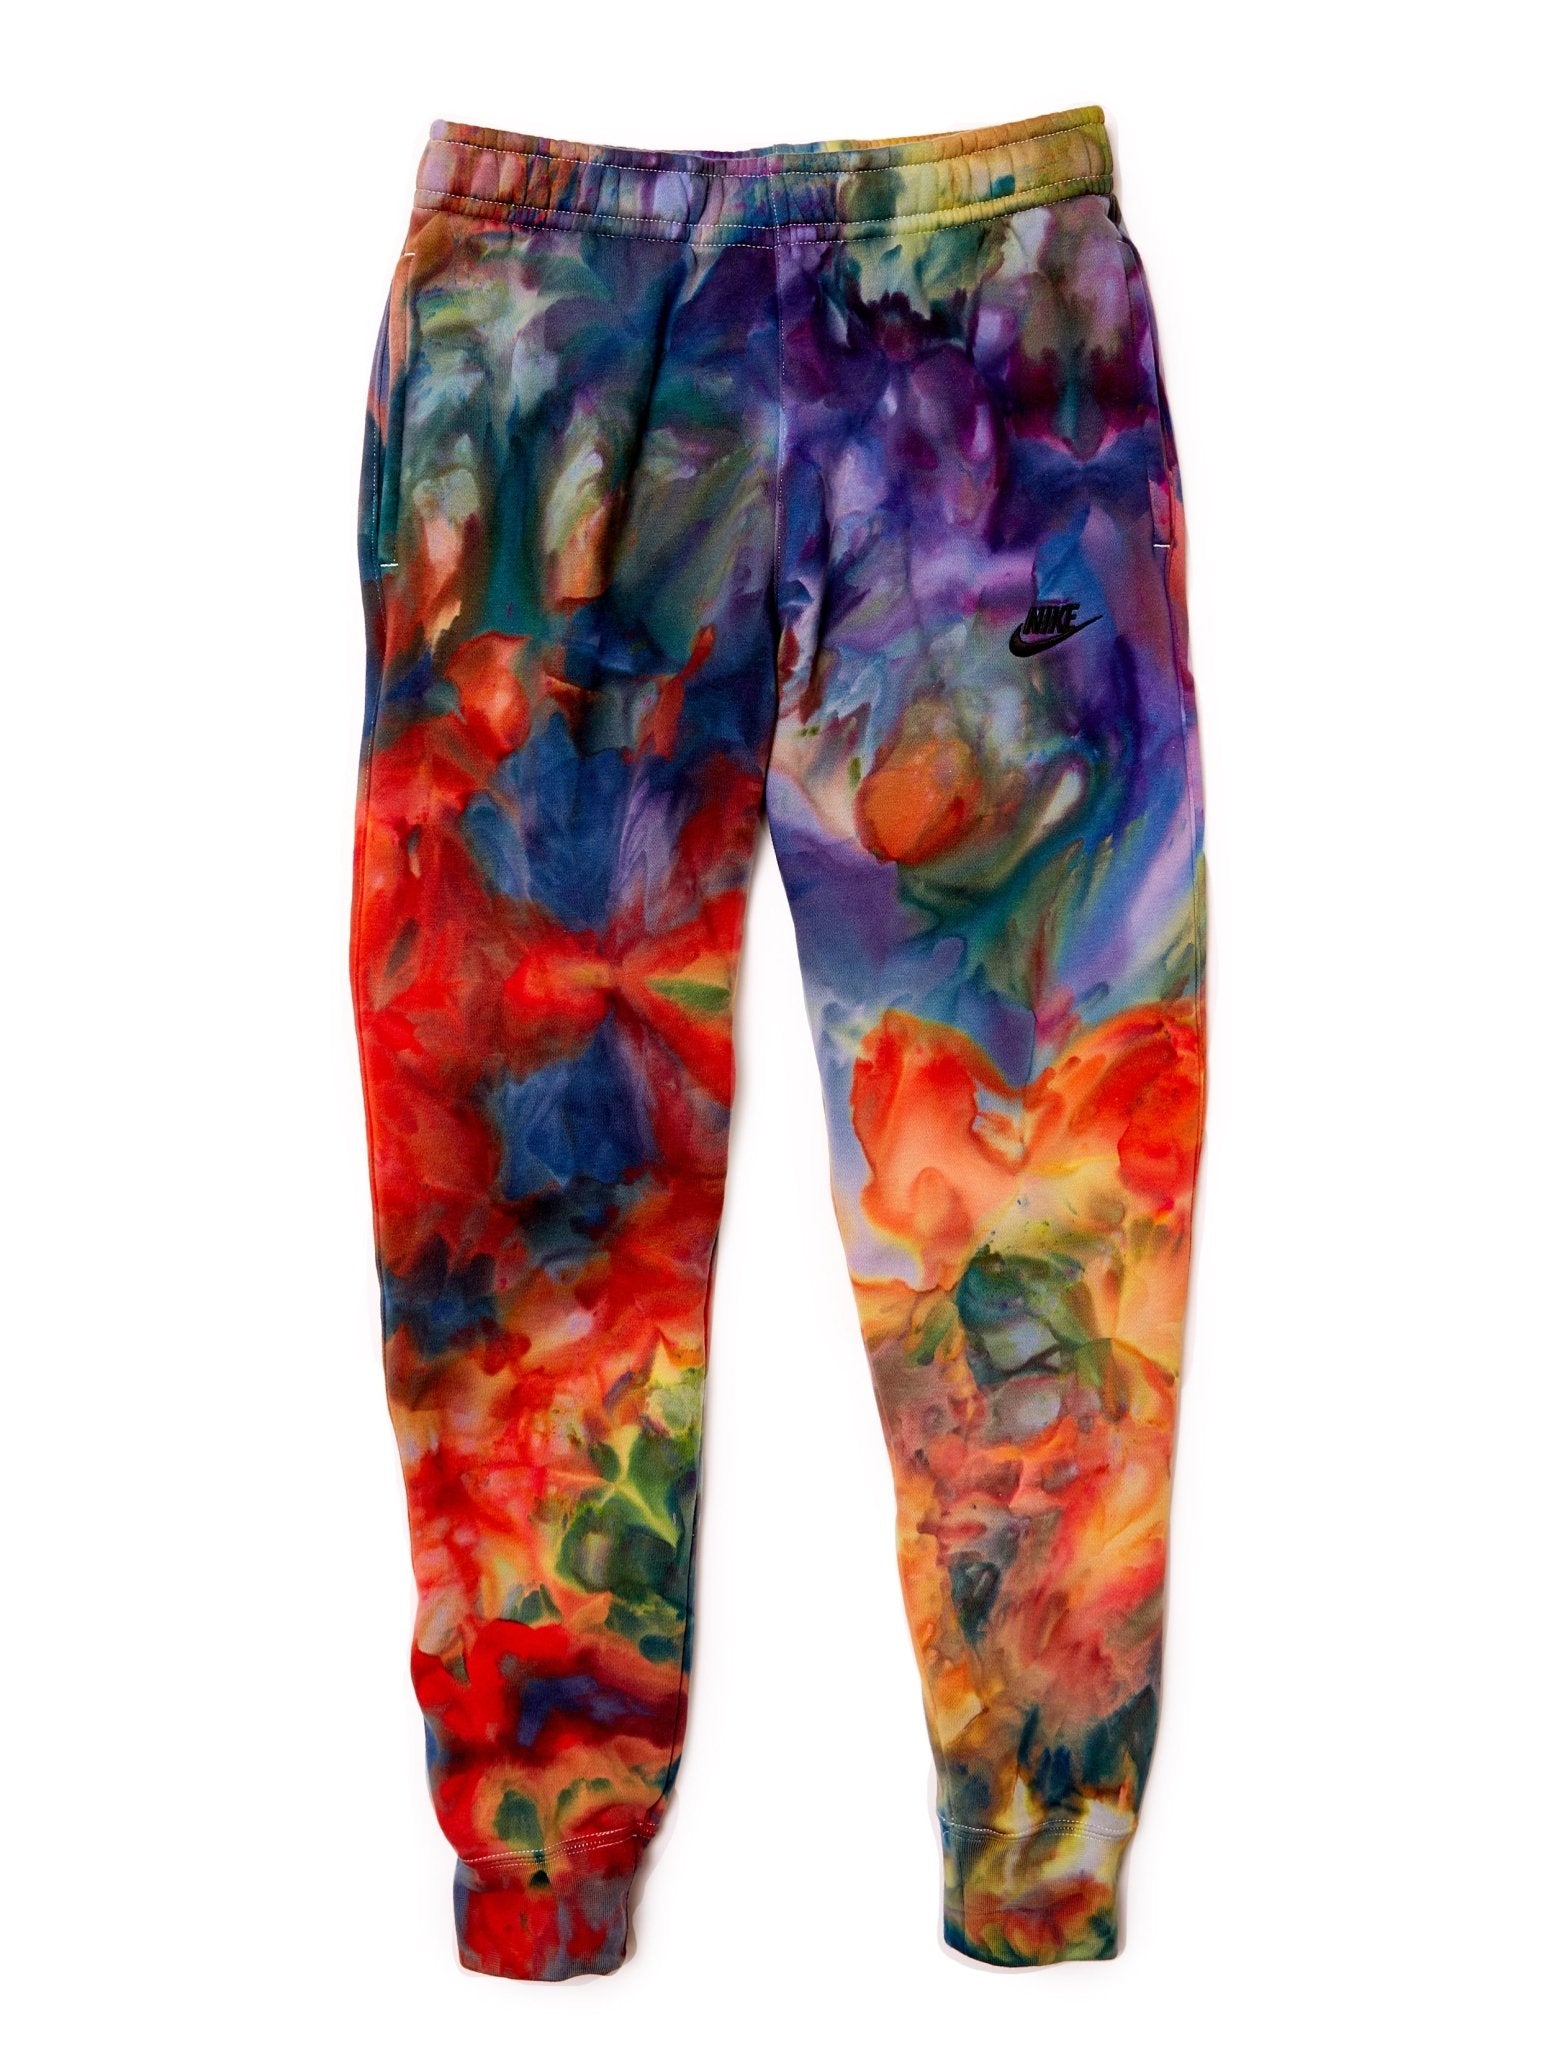 Nike Sweats in Sublime